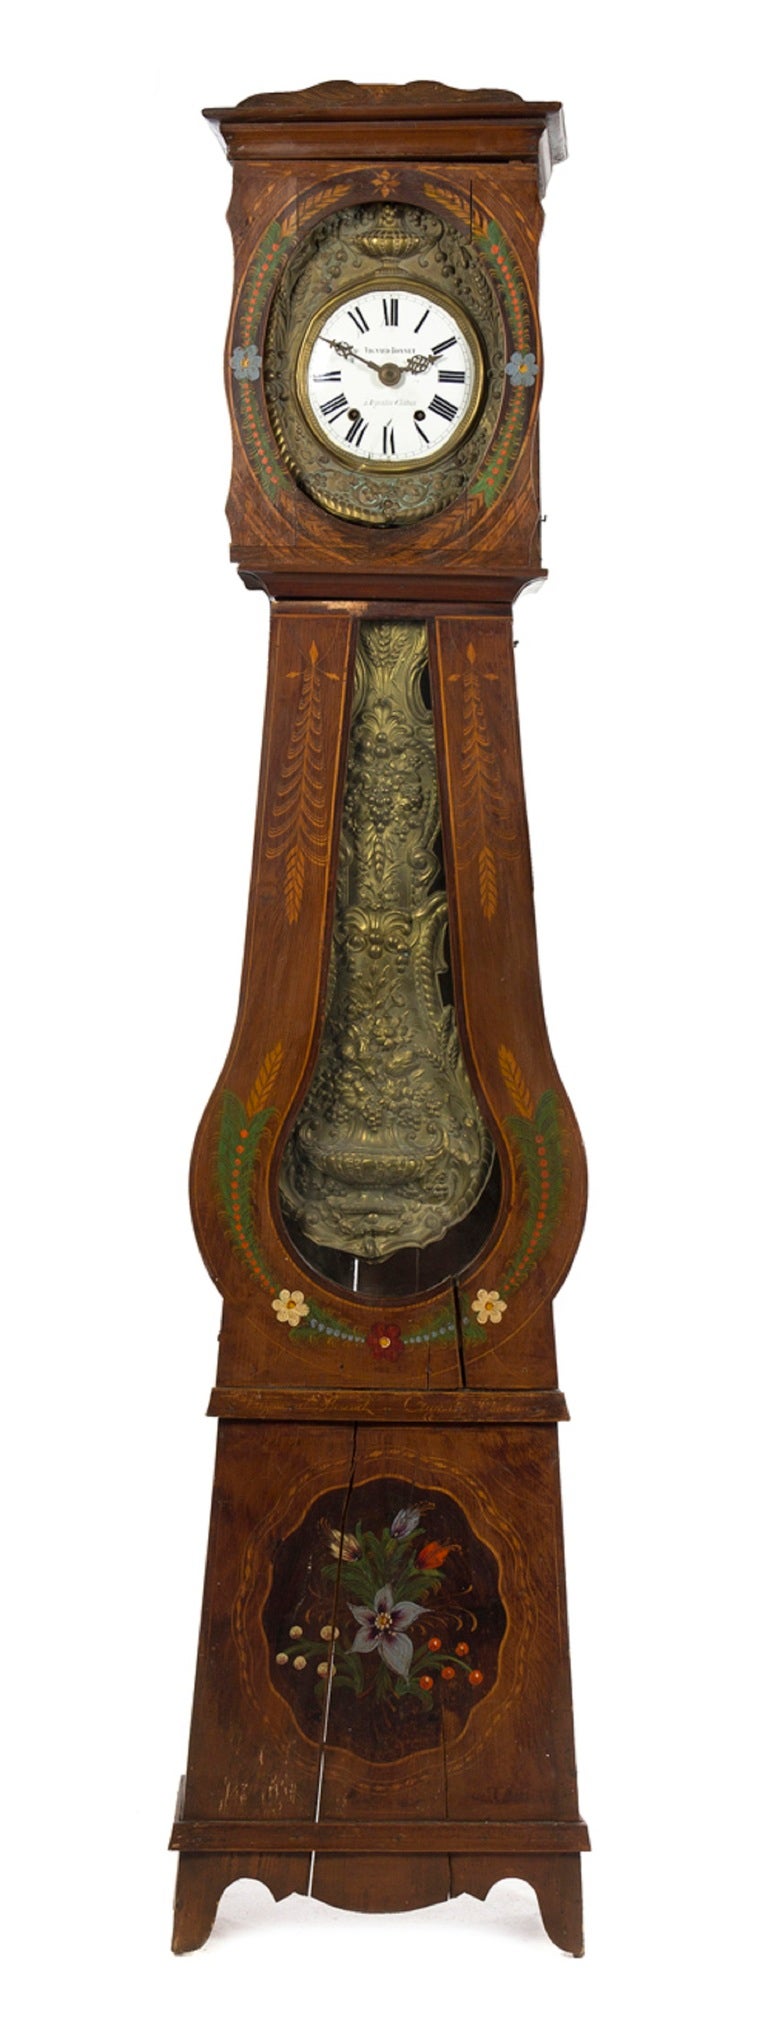 19th Century French Provincial Morbier Tall Case Clock, Vignaud Bonnet, having a circular dial with Roman numerals and a pressed brass pendulum, the case with painted floral decoration throughout